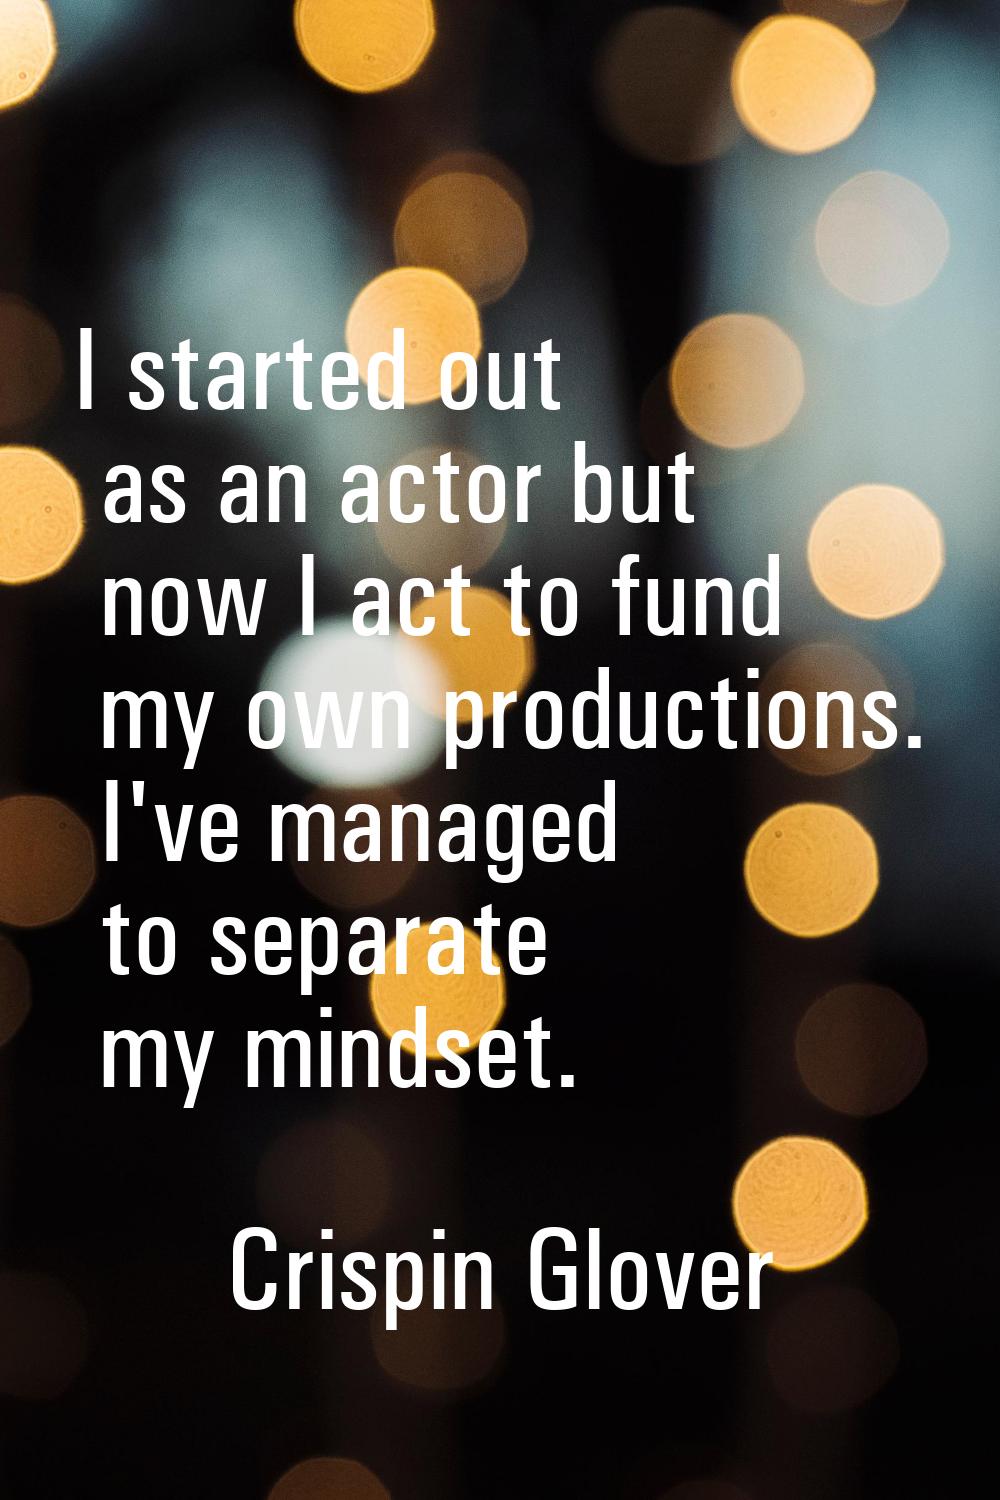 I started out as an actor but now I act to fund my own productions. I've managed to separate my min